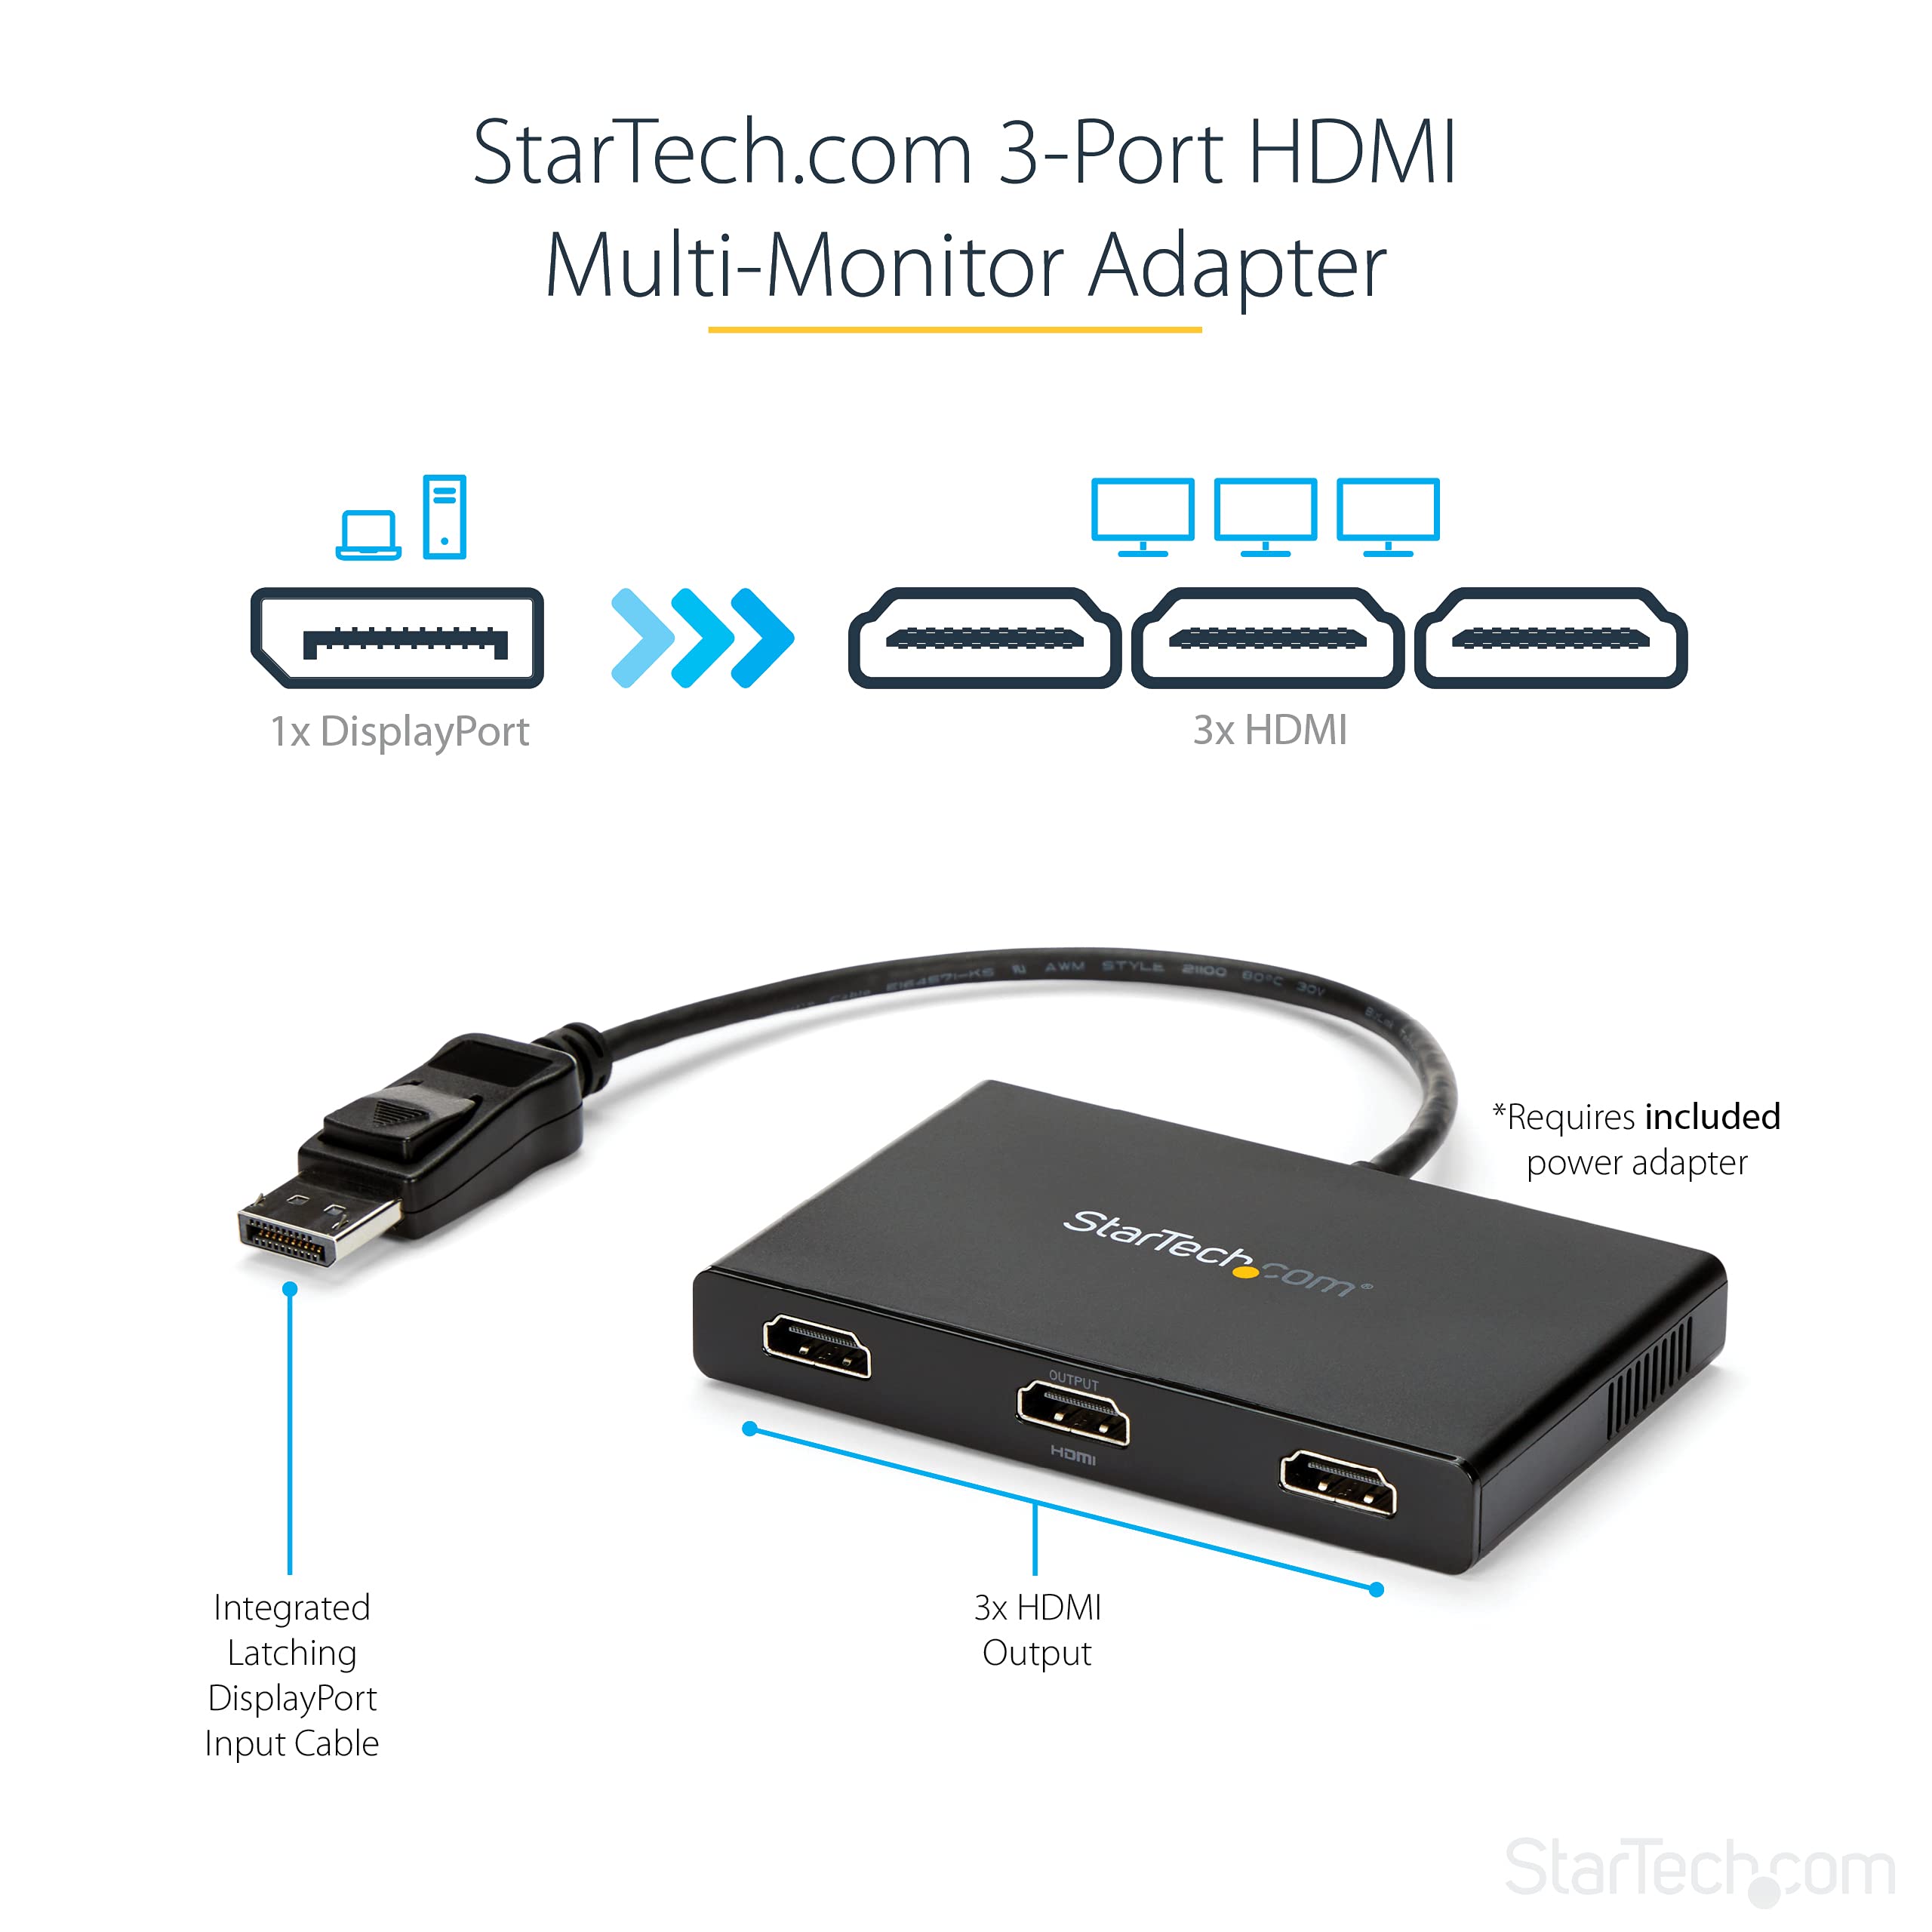 StarTech.com 3-Port Multi Monitor Adapter - DisplayPort 1.2 to 3x HDMI MST Hub - Triple 1080p HDMI Monitors - Extended or Cloned Display mode - Windows PCs Only - DP to 3x HDMI Splitter (MSTDP123HD)